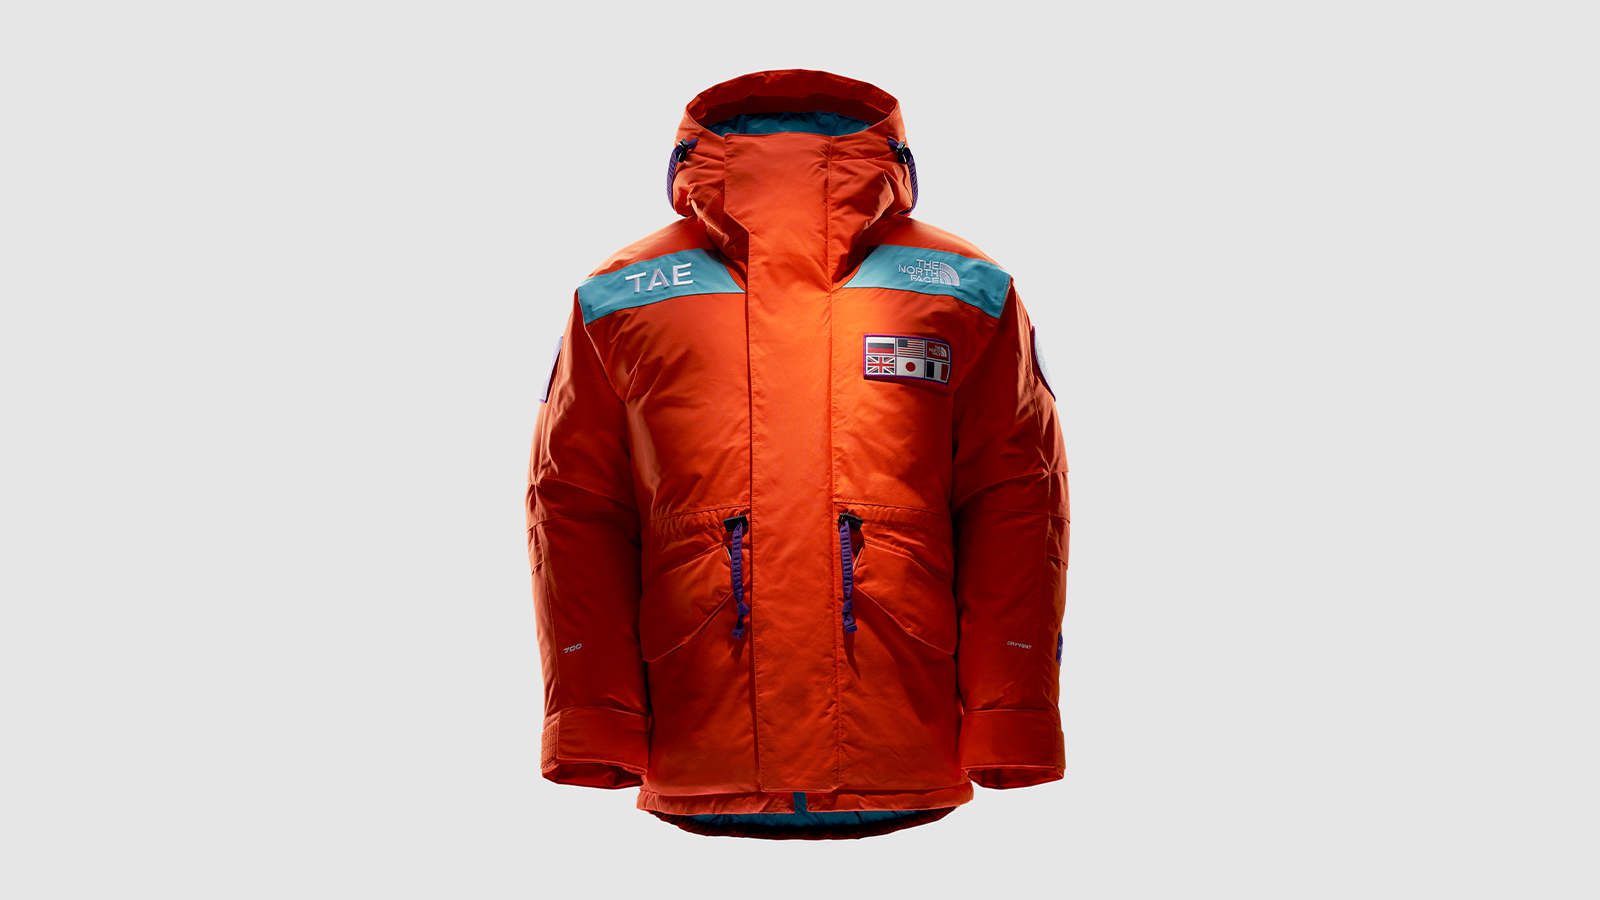 The North Face Trans Antarctica Expedition Parka